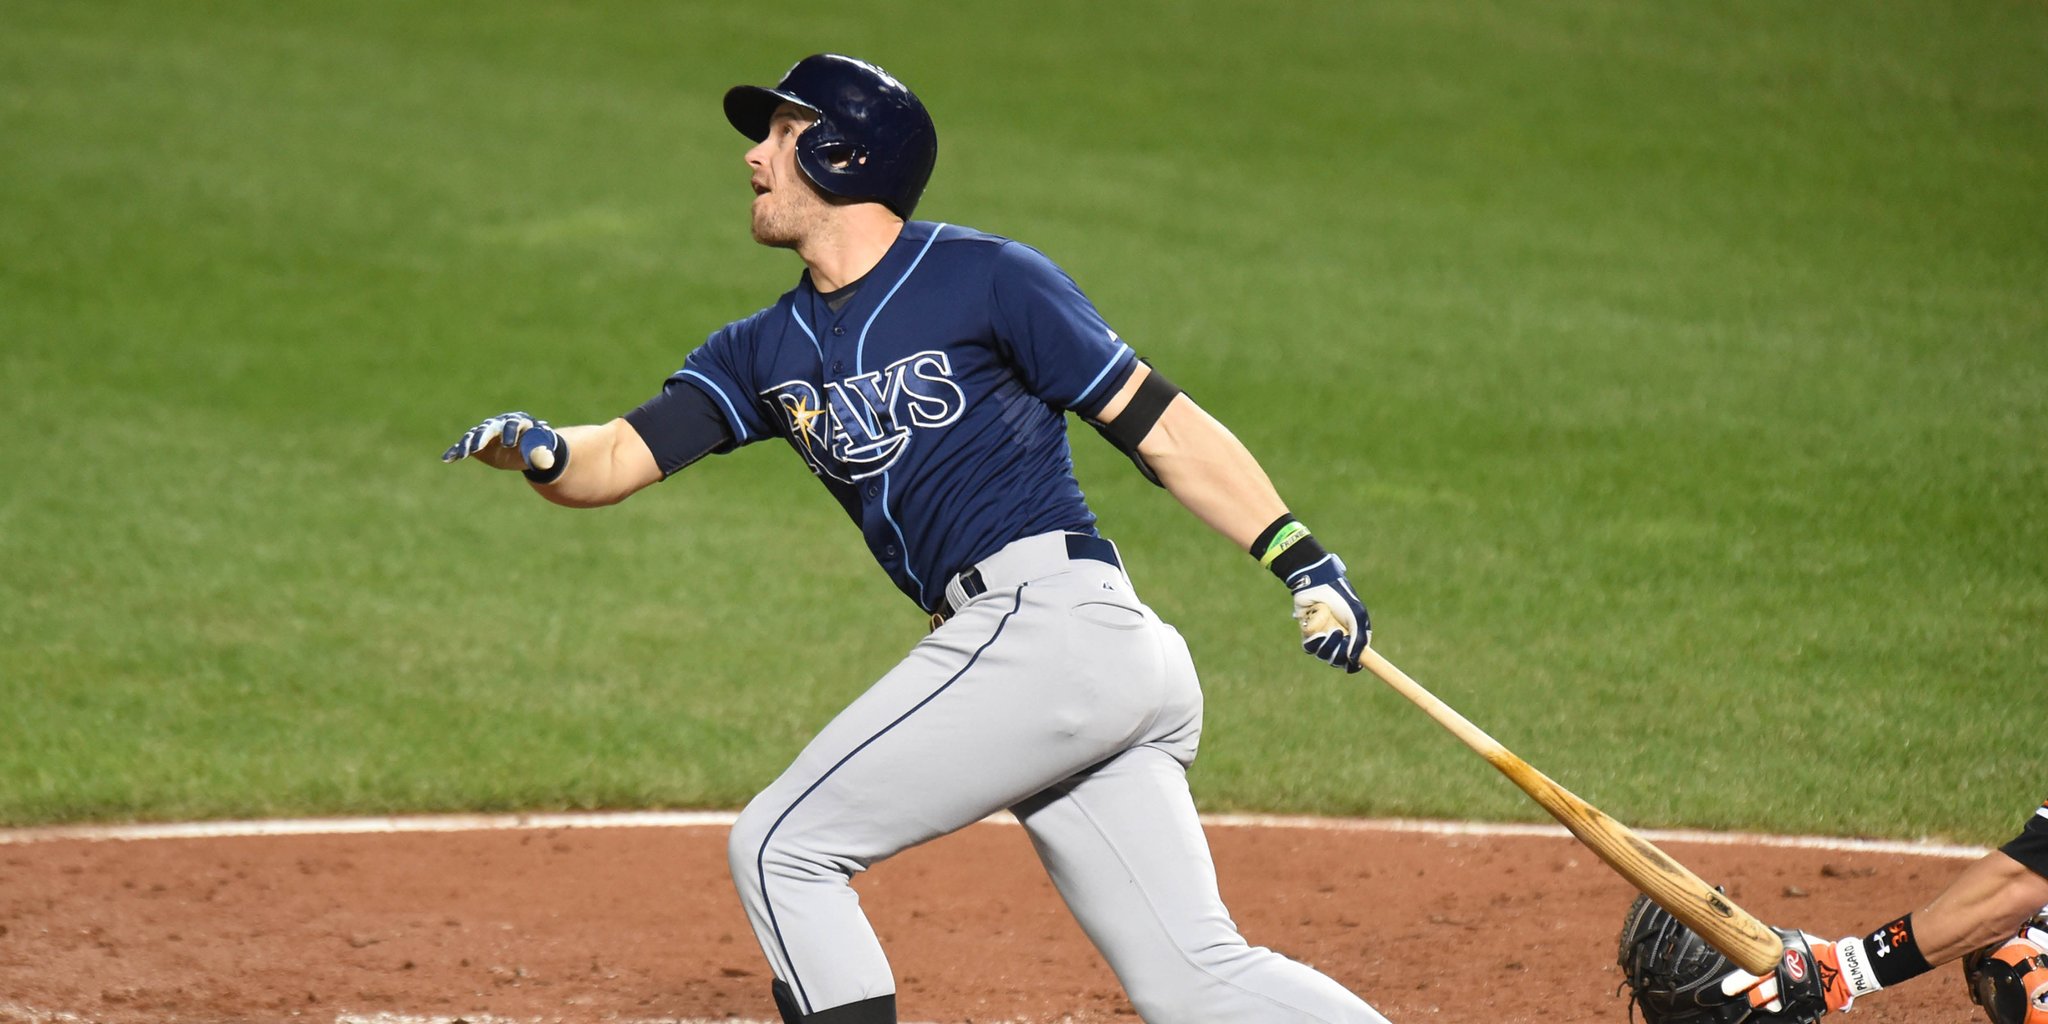 Evan Longoria has gone yard in three consecutive games. He'll try to make it four this afternoon. (Photo Credit: Tampa Bay Rays)